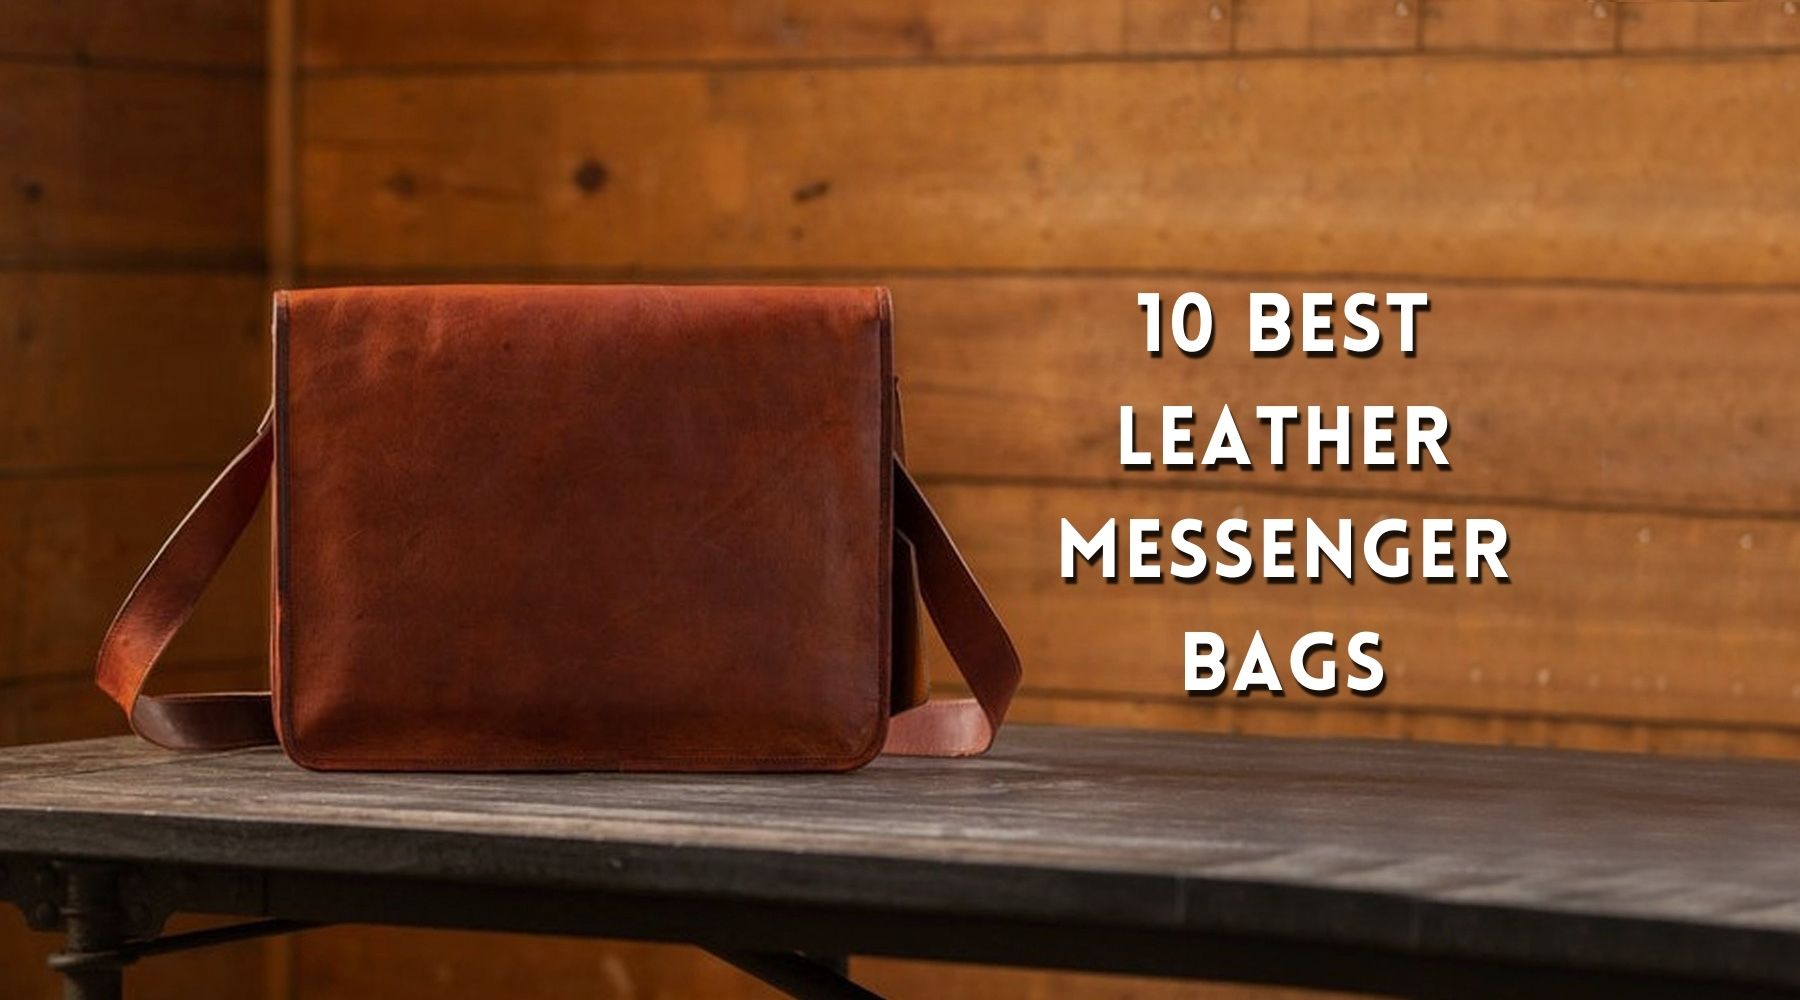 10 Best Leather Messenger Bags for Men and Women 